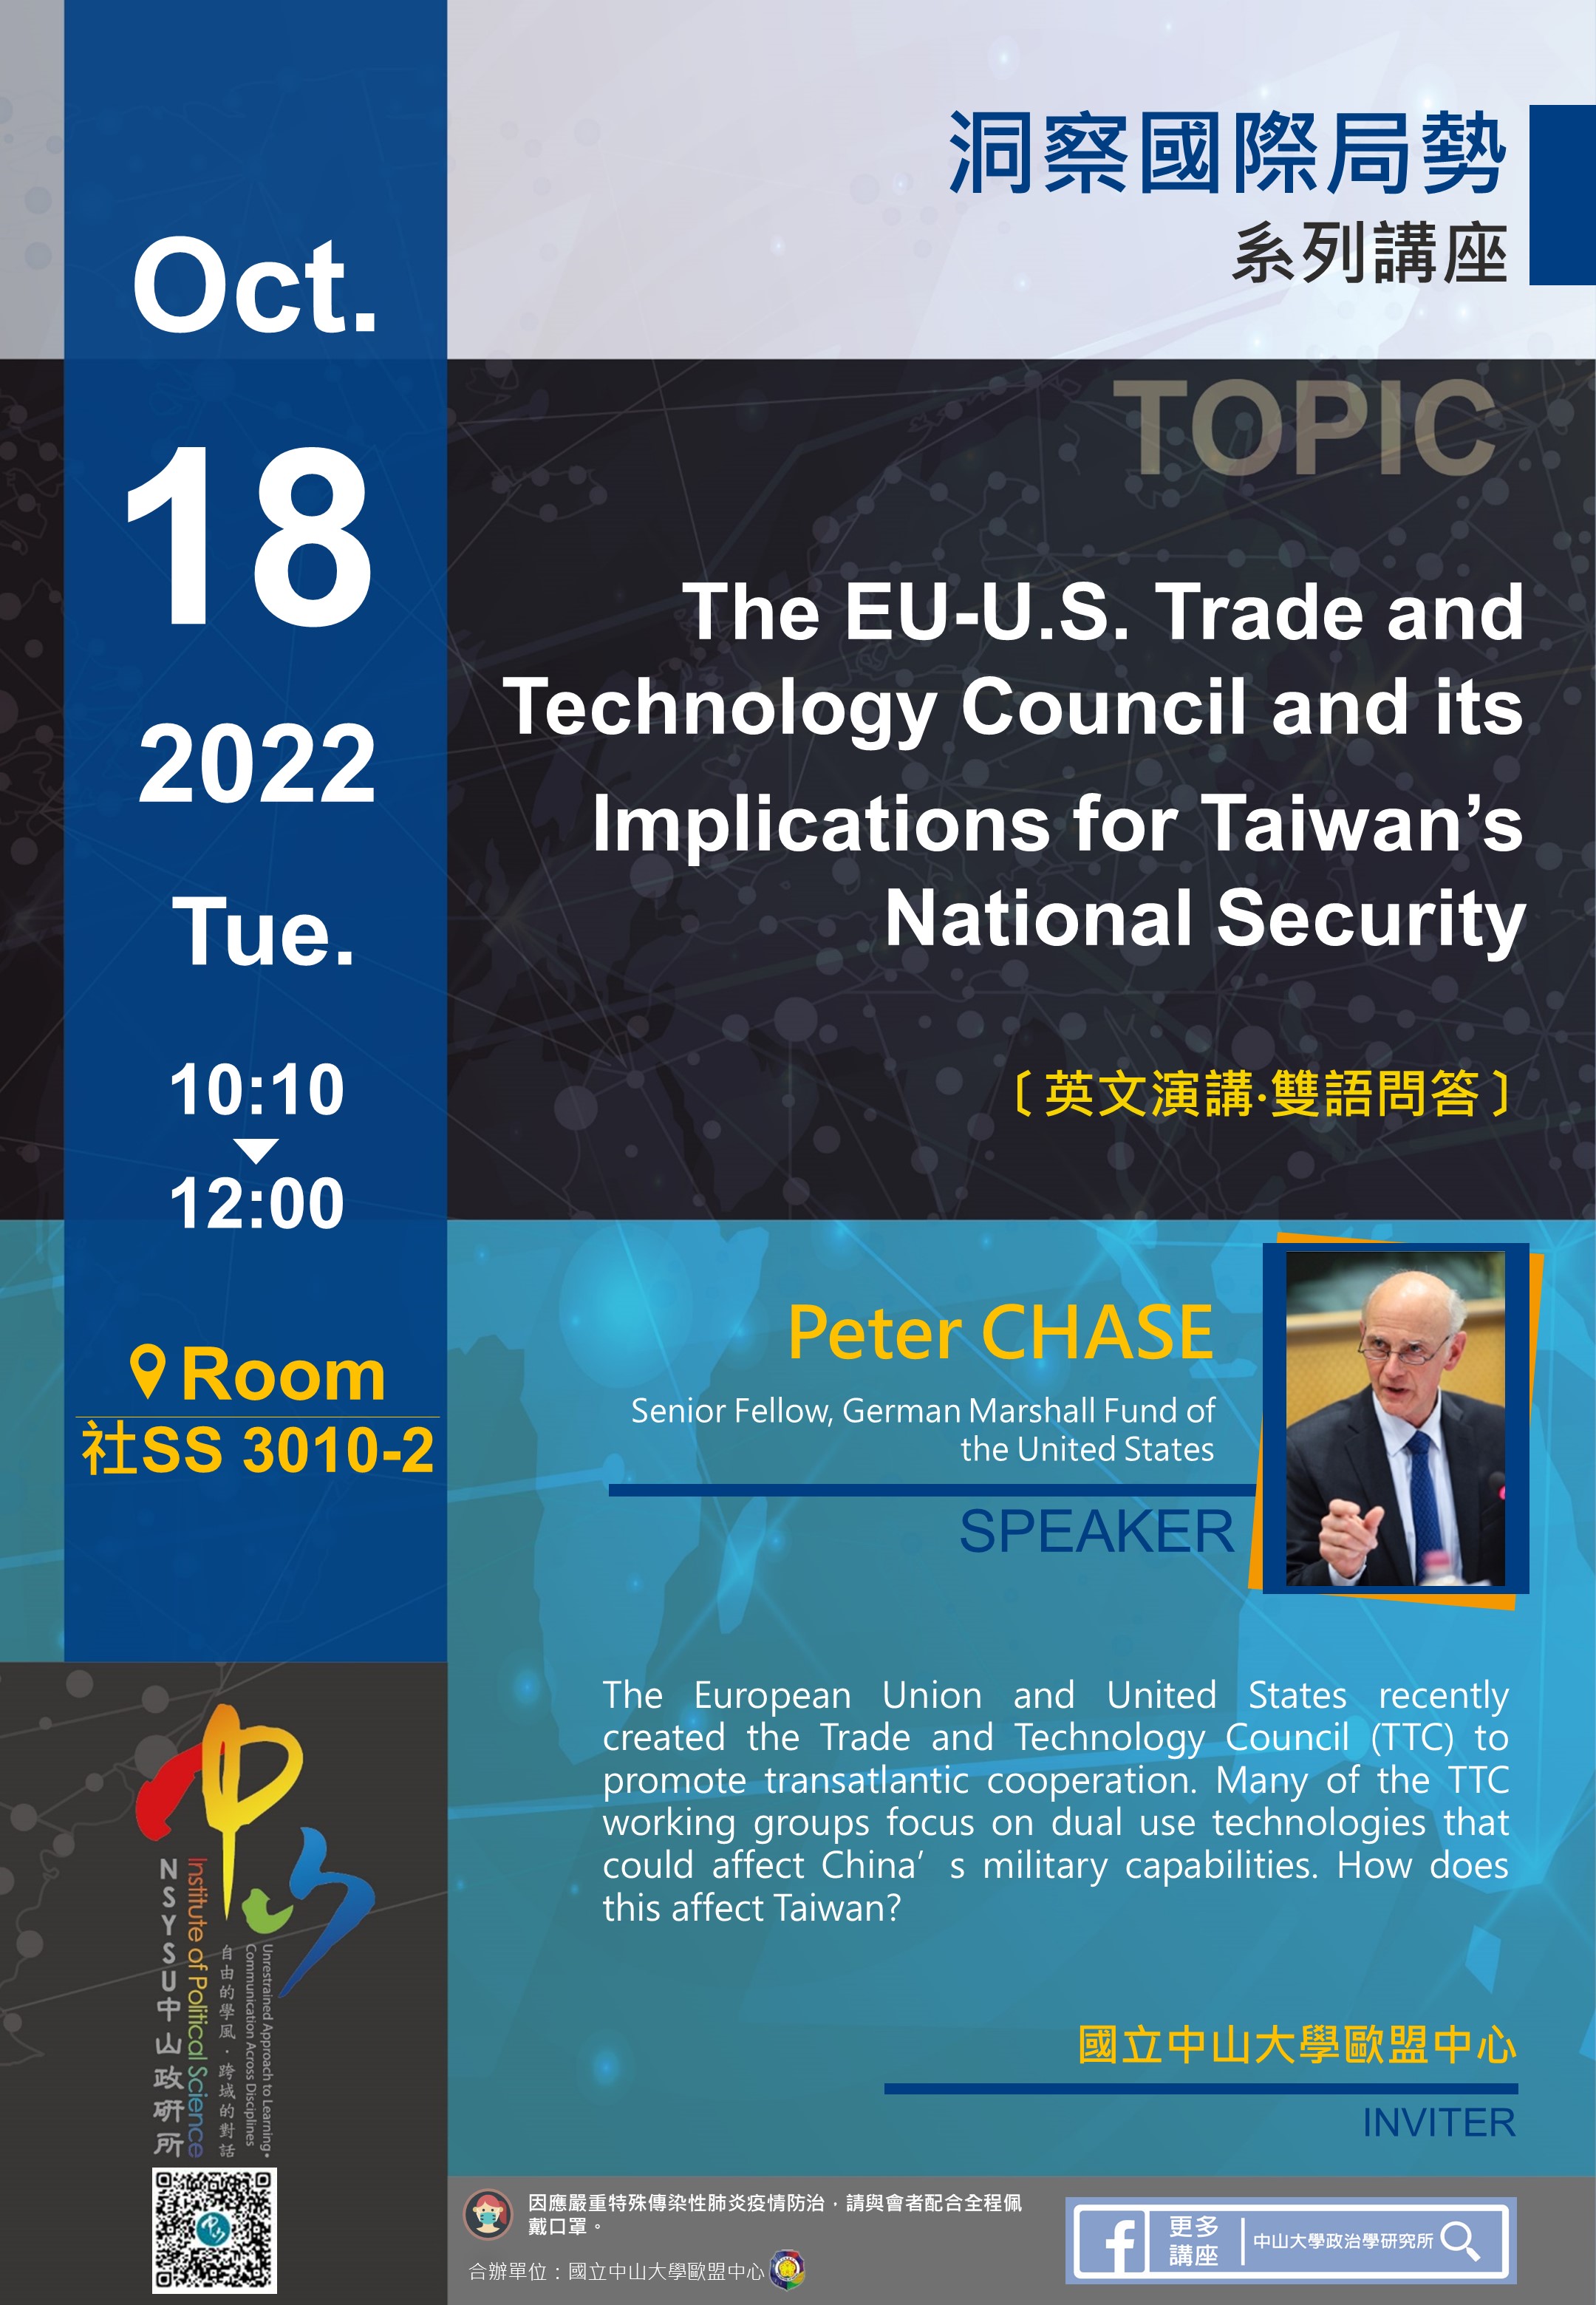 Peter CHASE：The EU-U.S. Trade and Technology Council and it’s Implications for Taiwan’s National Security